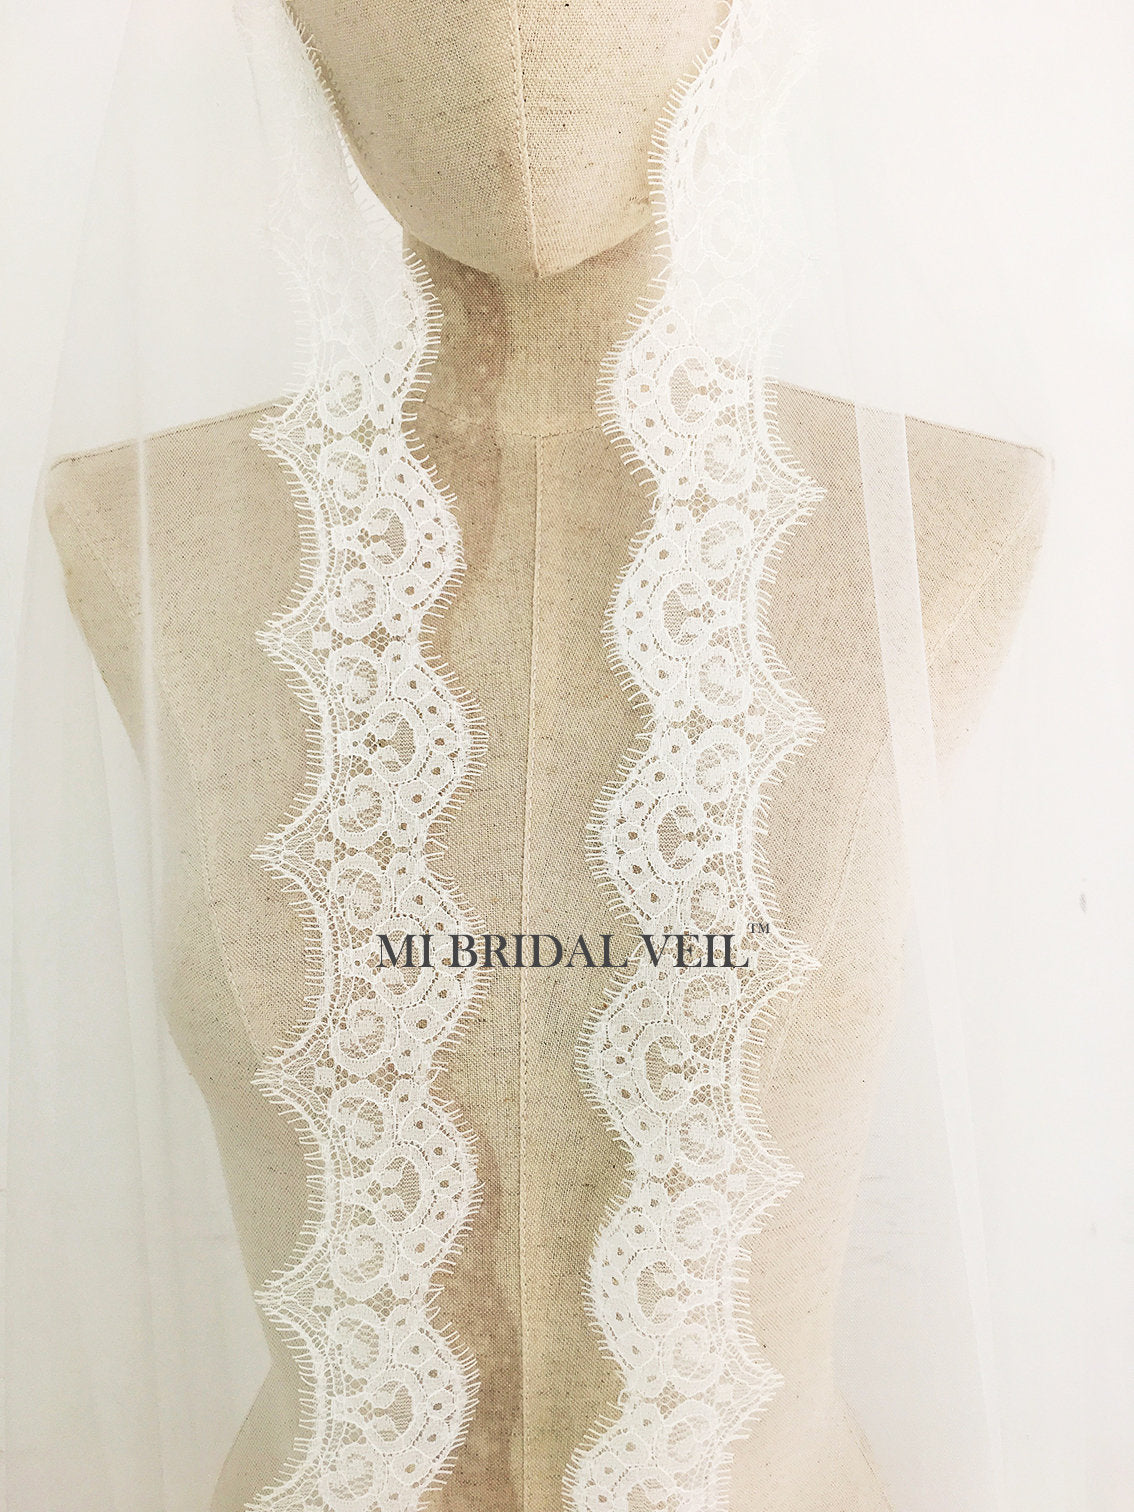 Cathedral Mantilla Veil with Eyelash Lace Trim, White or Ivory Lace Wedding  Veil